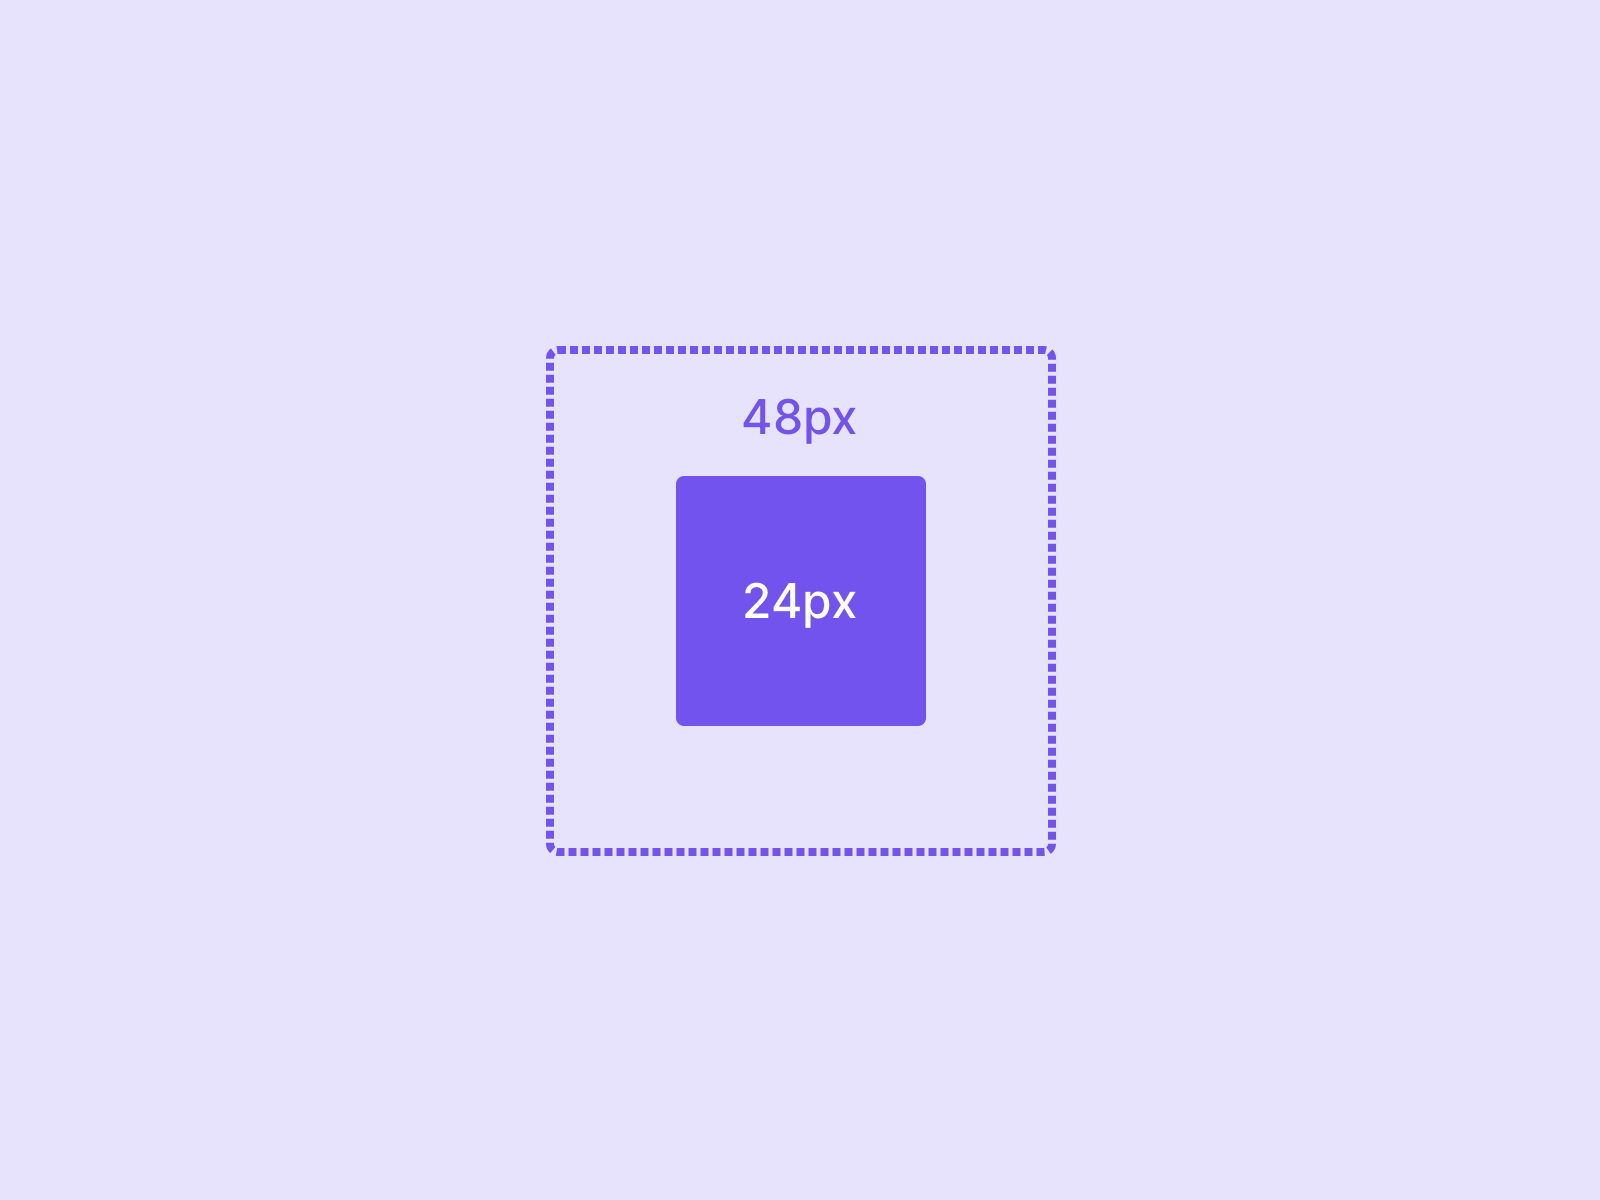 For example an icon can be placed at 24px × 24px, with the space around the icon we still get a target size of at least 48px.